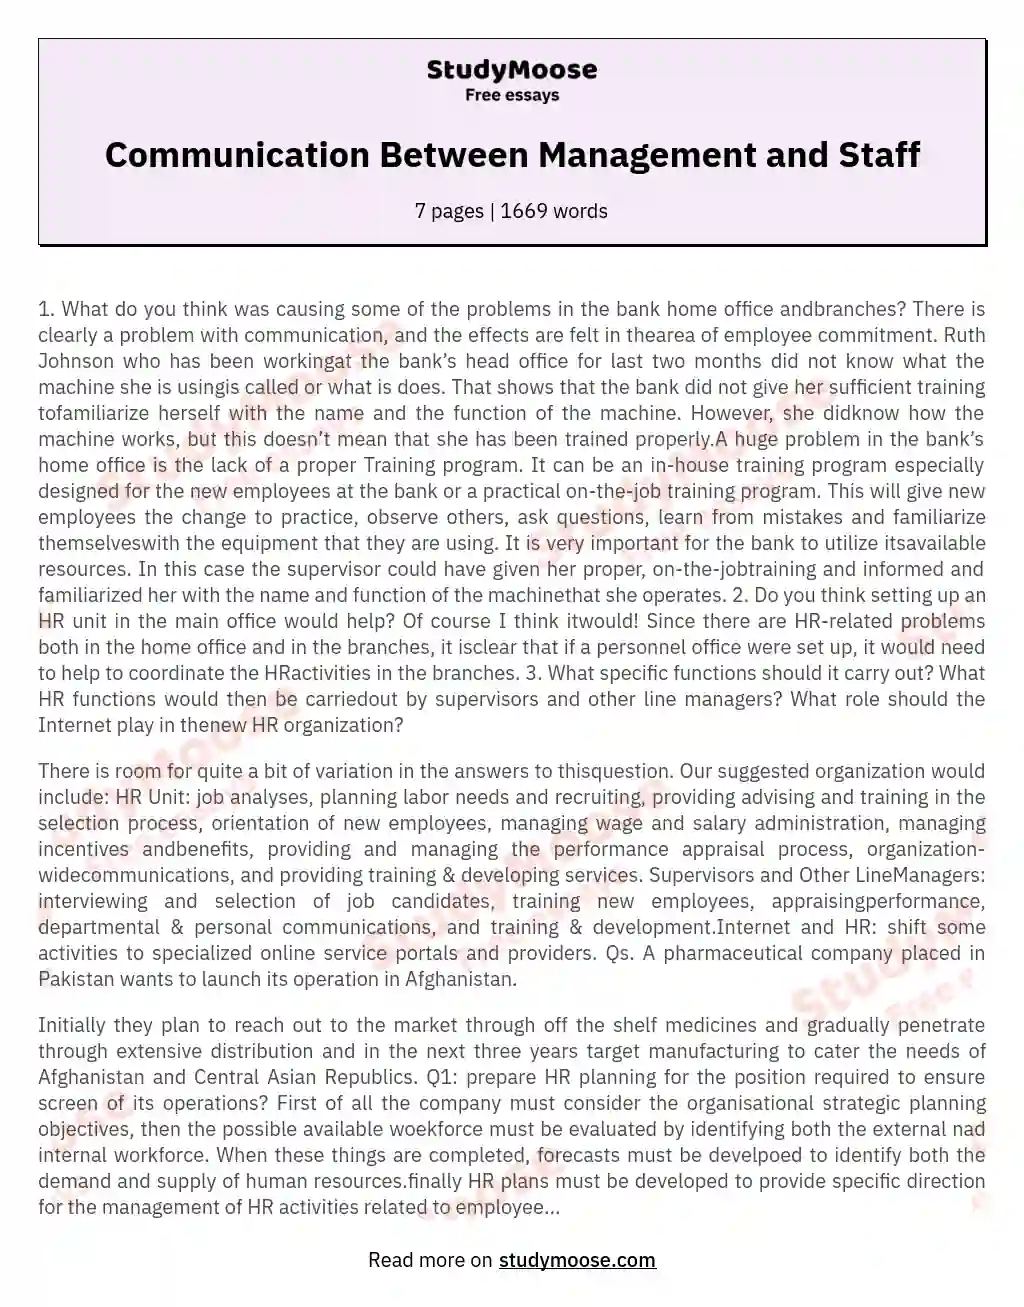 Communication Between Management and Staff essay